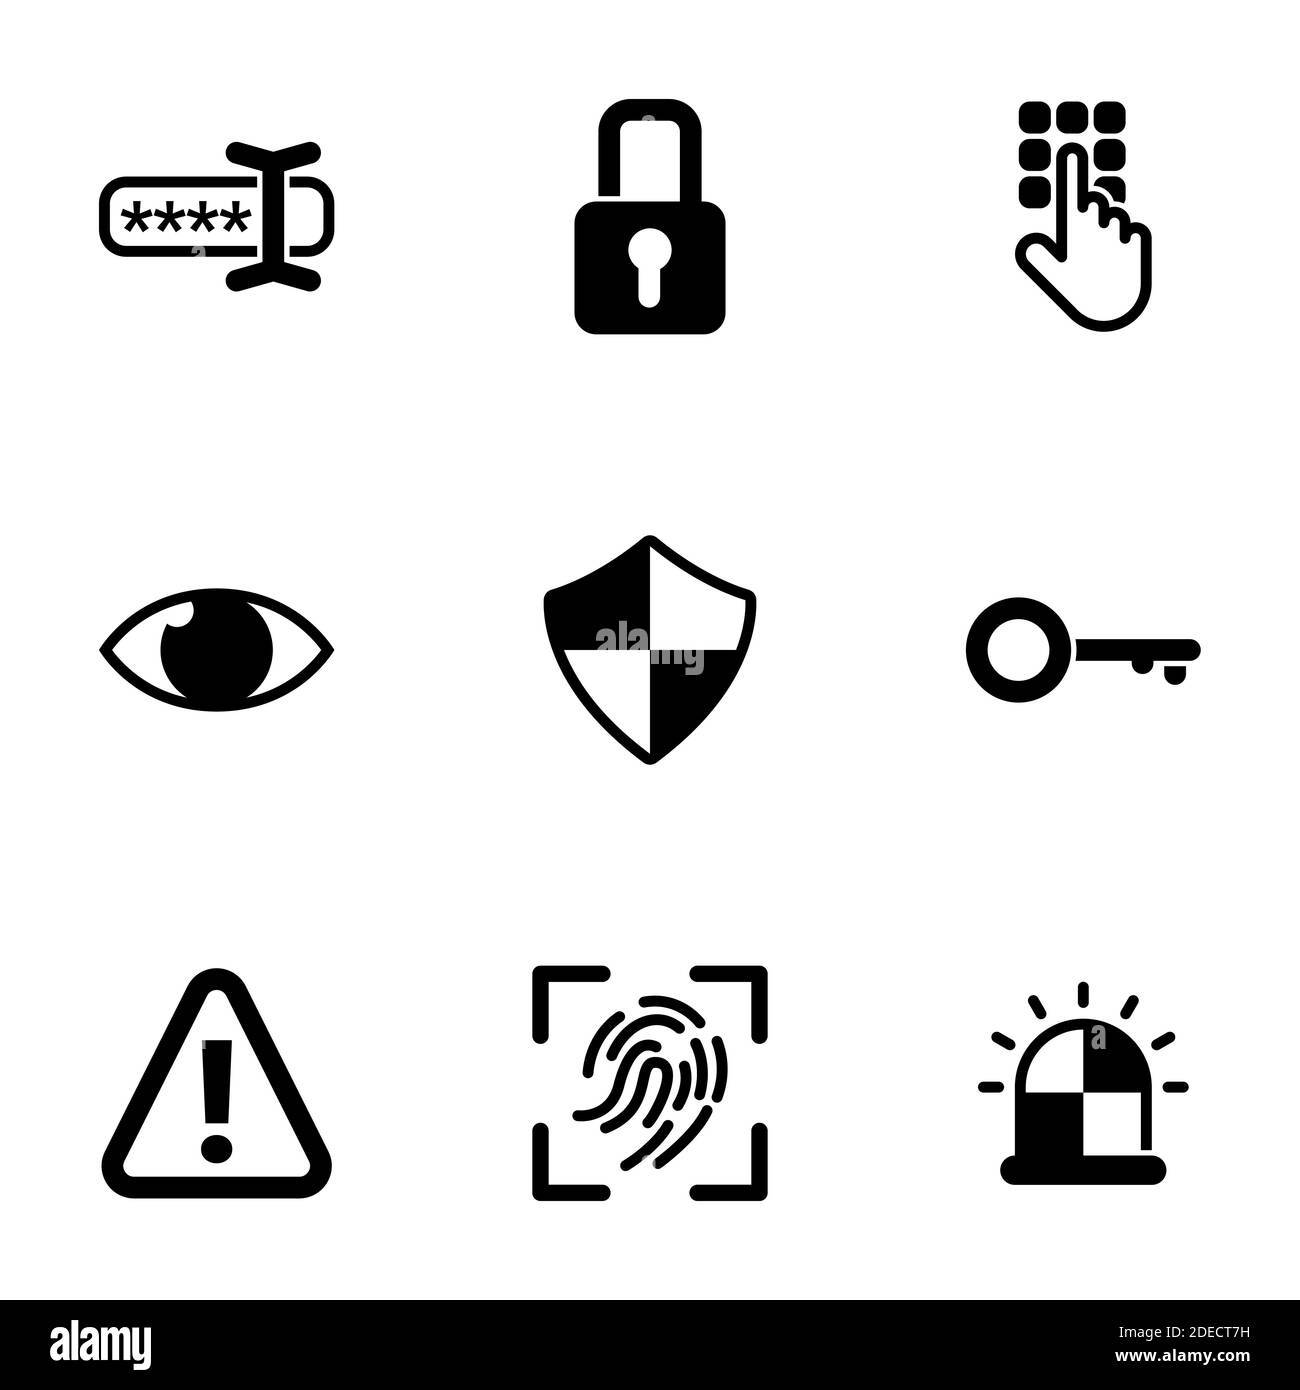 Set of simple icons on a theme Password, authorization, protection, personal data, vector, set. White background Stock Vector